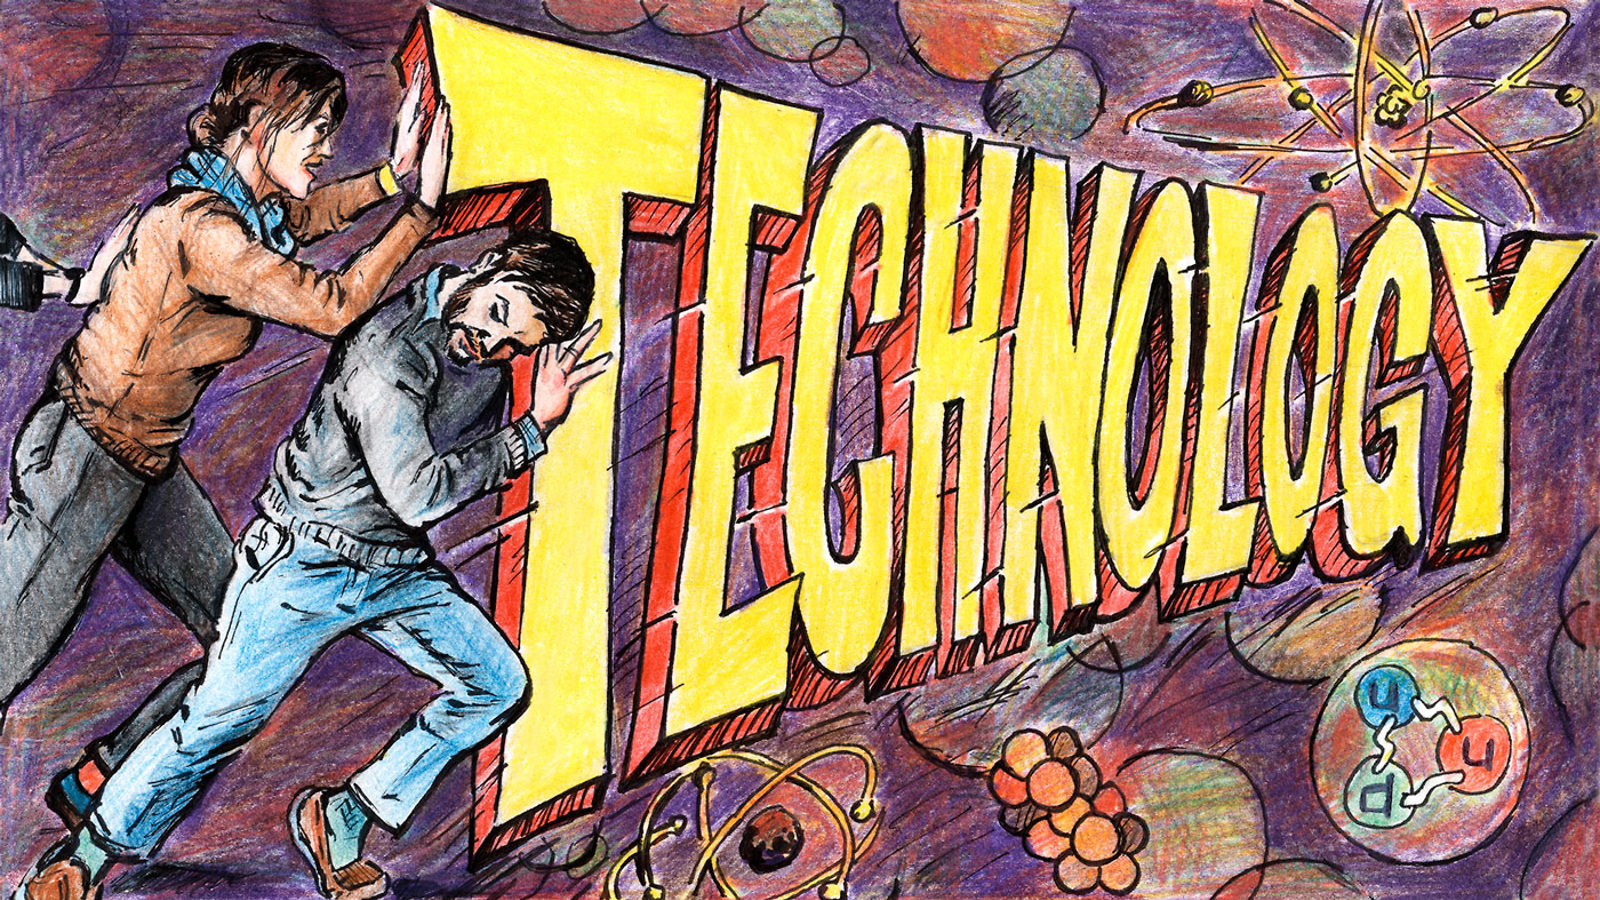 Illustration of Instrumentation Frontier: Two men pushing the word "Technology"